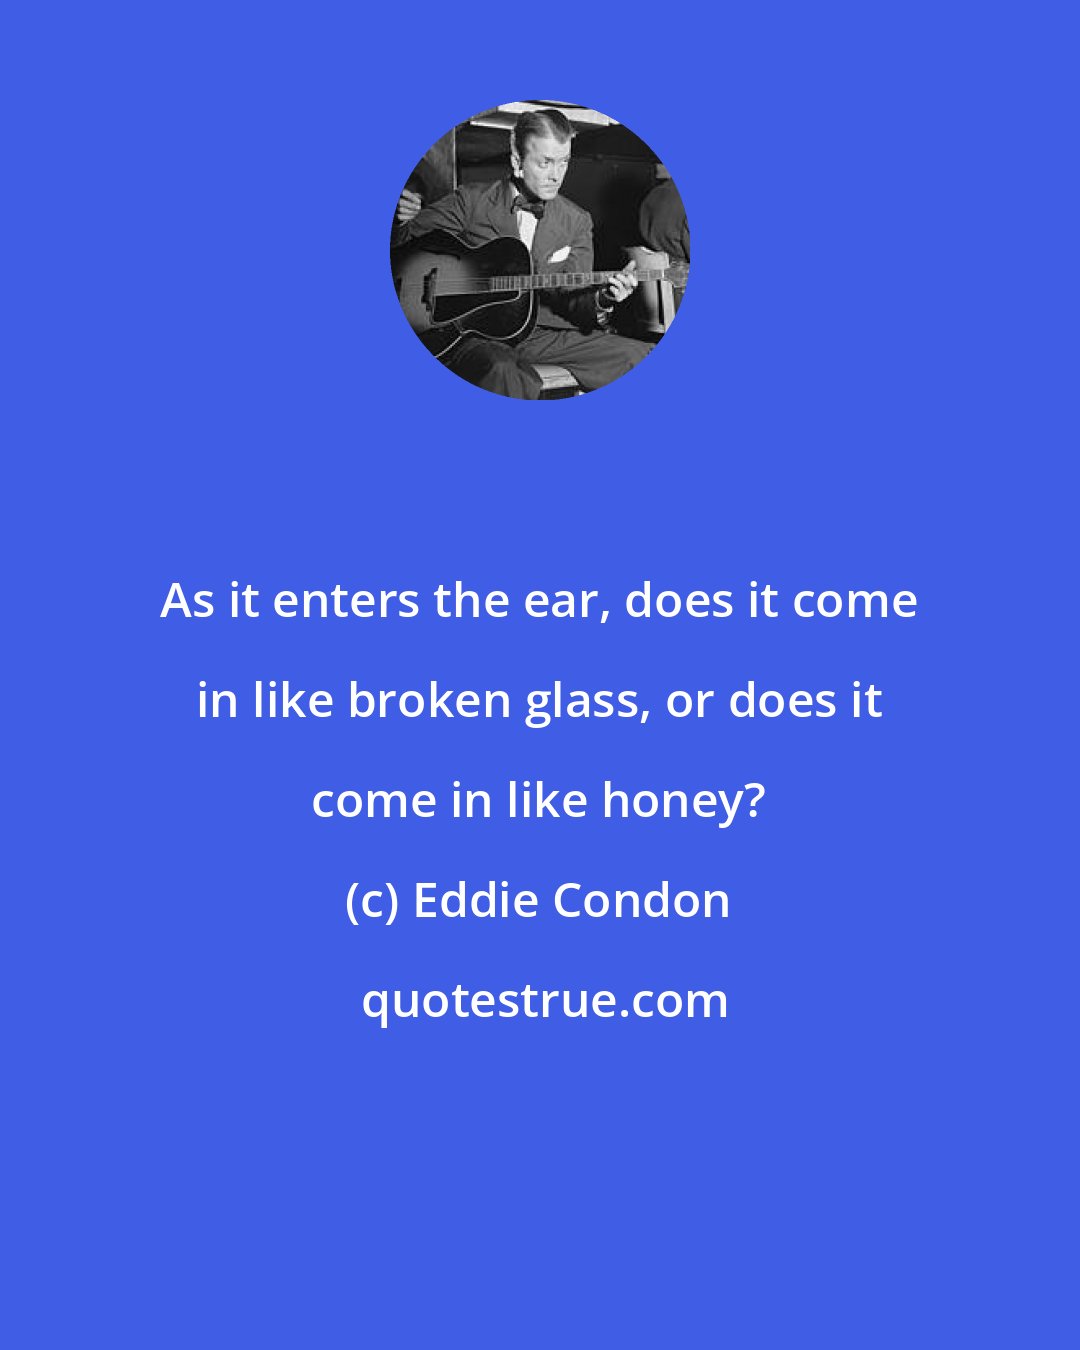 Eddie Condon: As it enters the ear, does it come in like broken glass, or does it come in like honey?